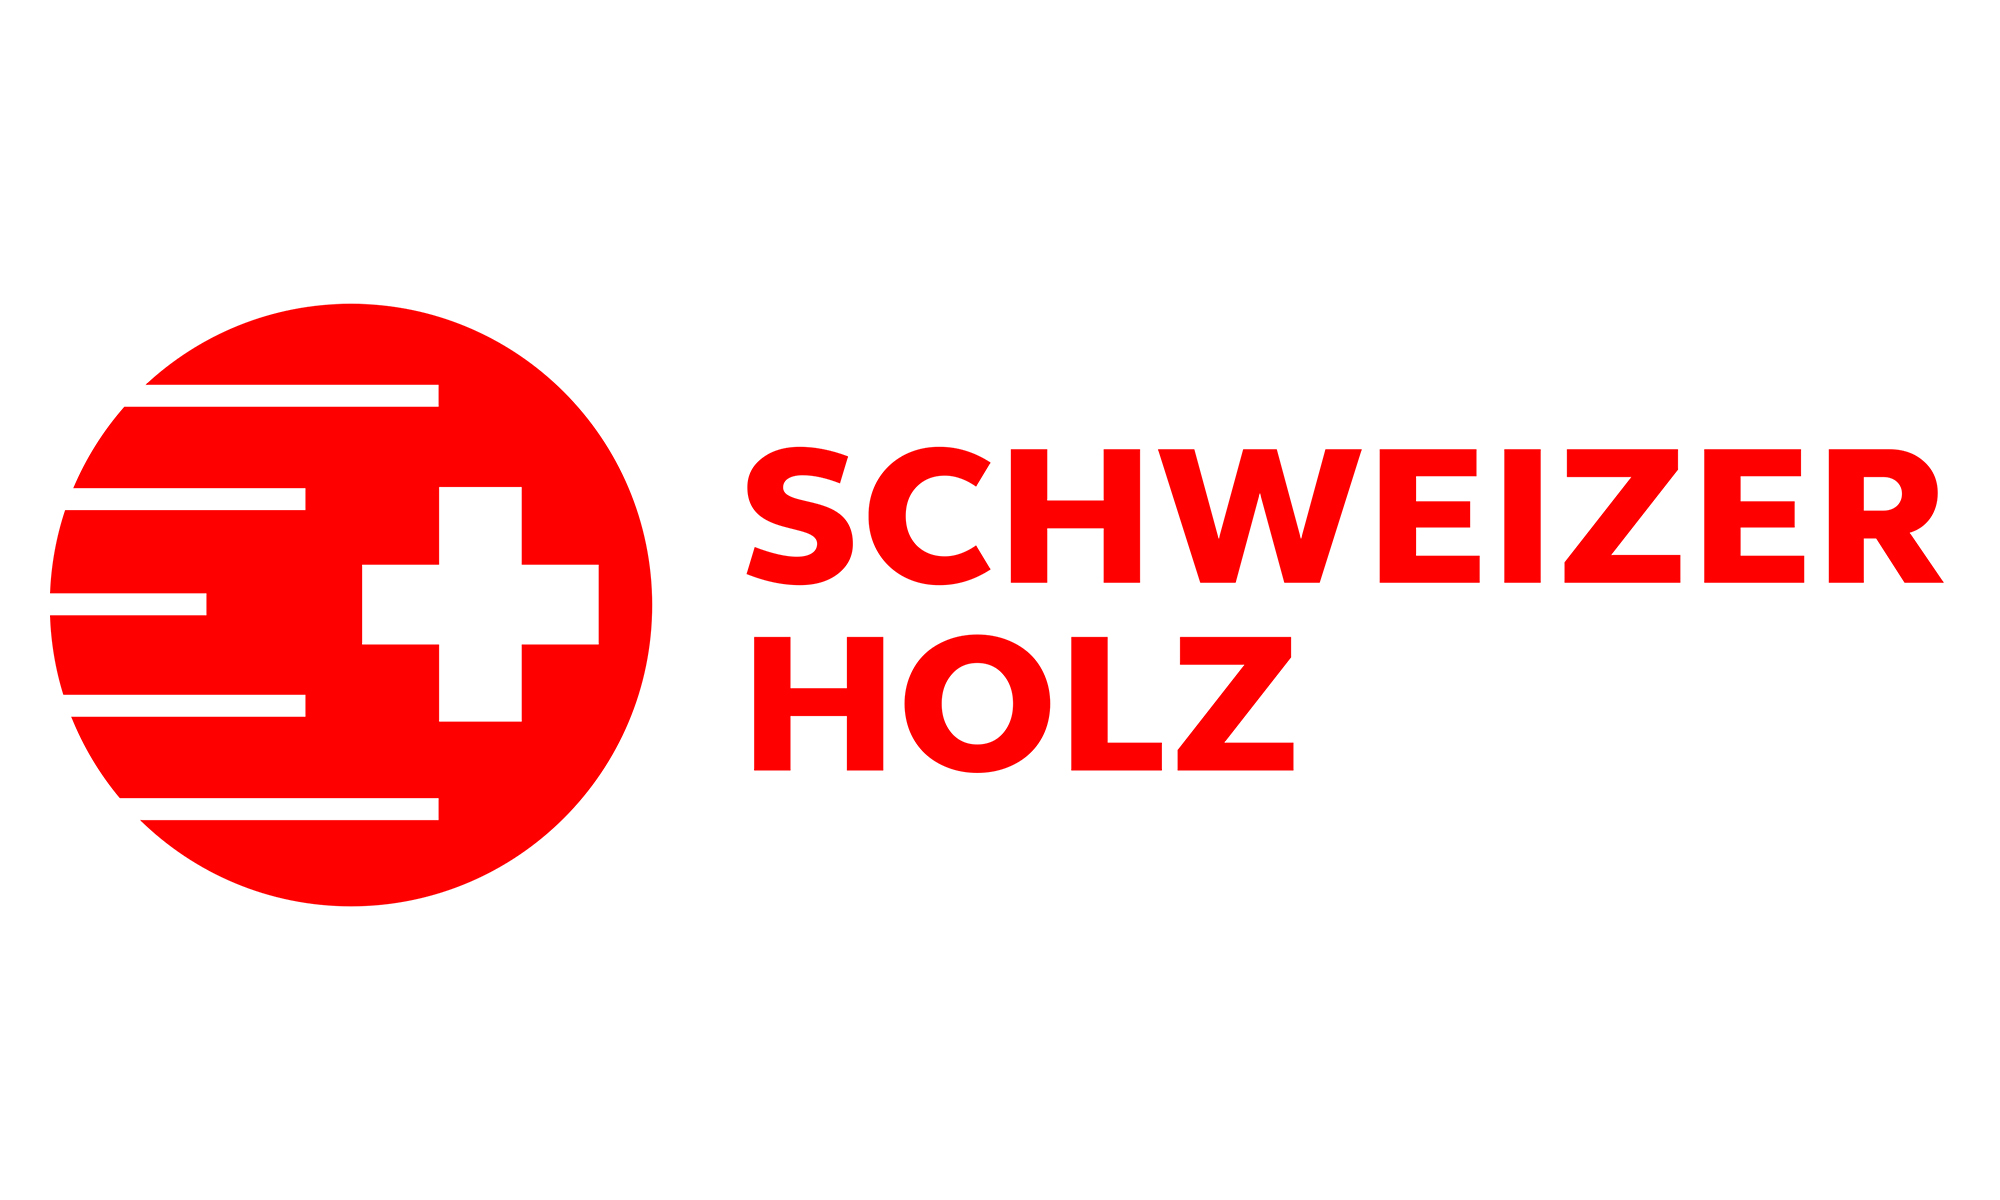 Red logo of the label Swiss wood in german